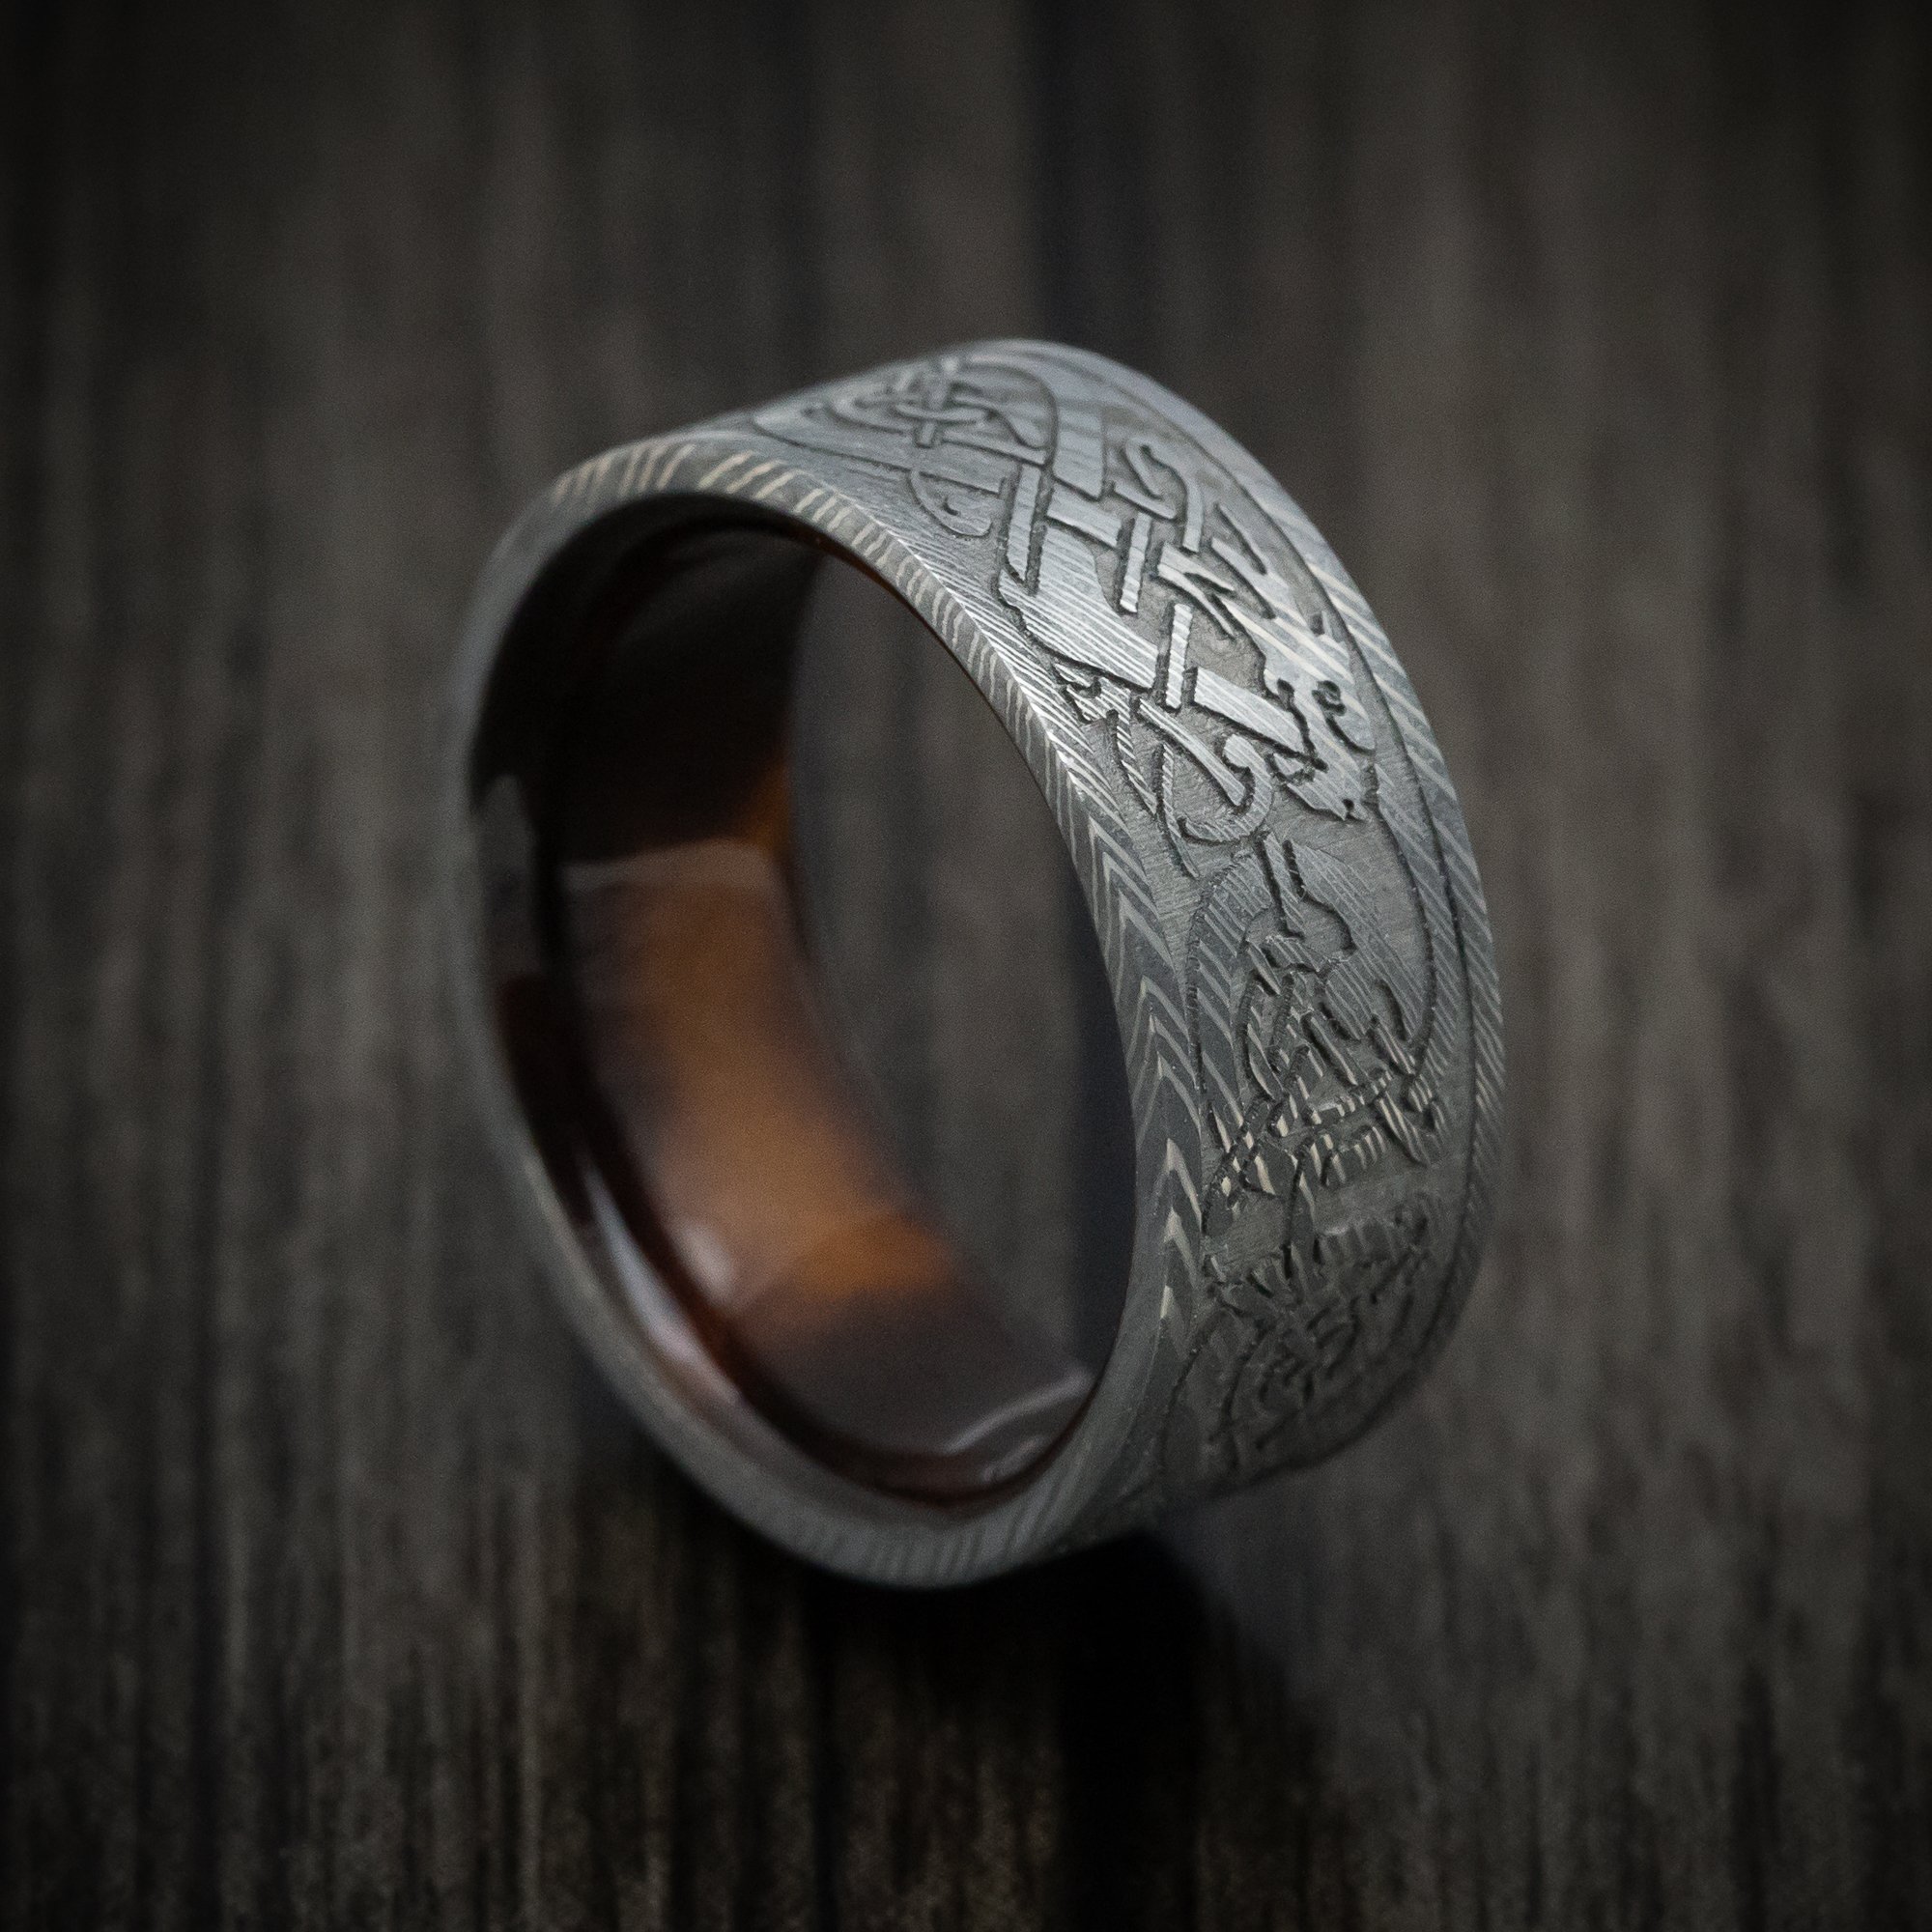 Damascus Steel Dragon Ring With Wood Sleeve Damascus Knives